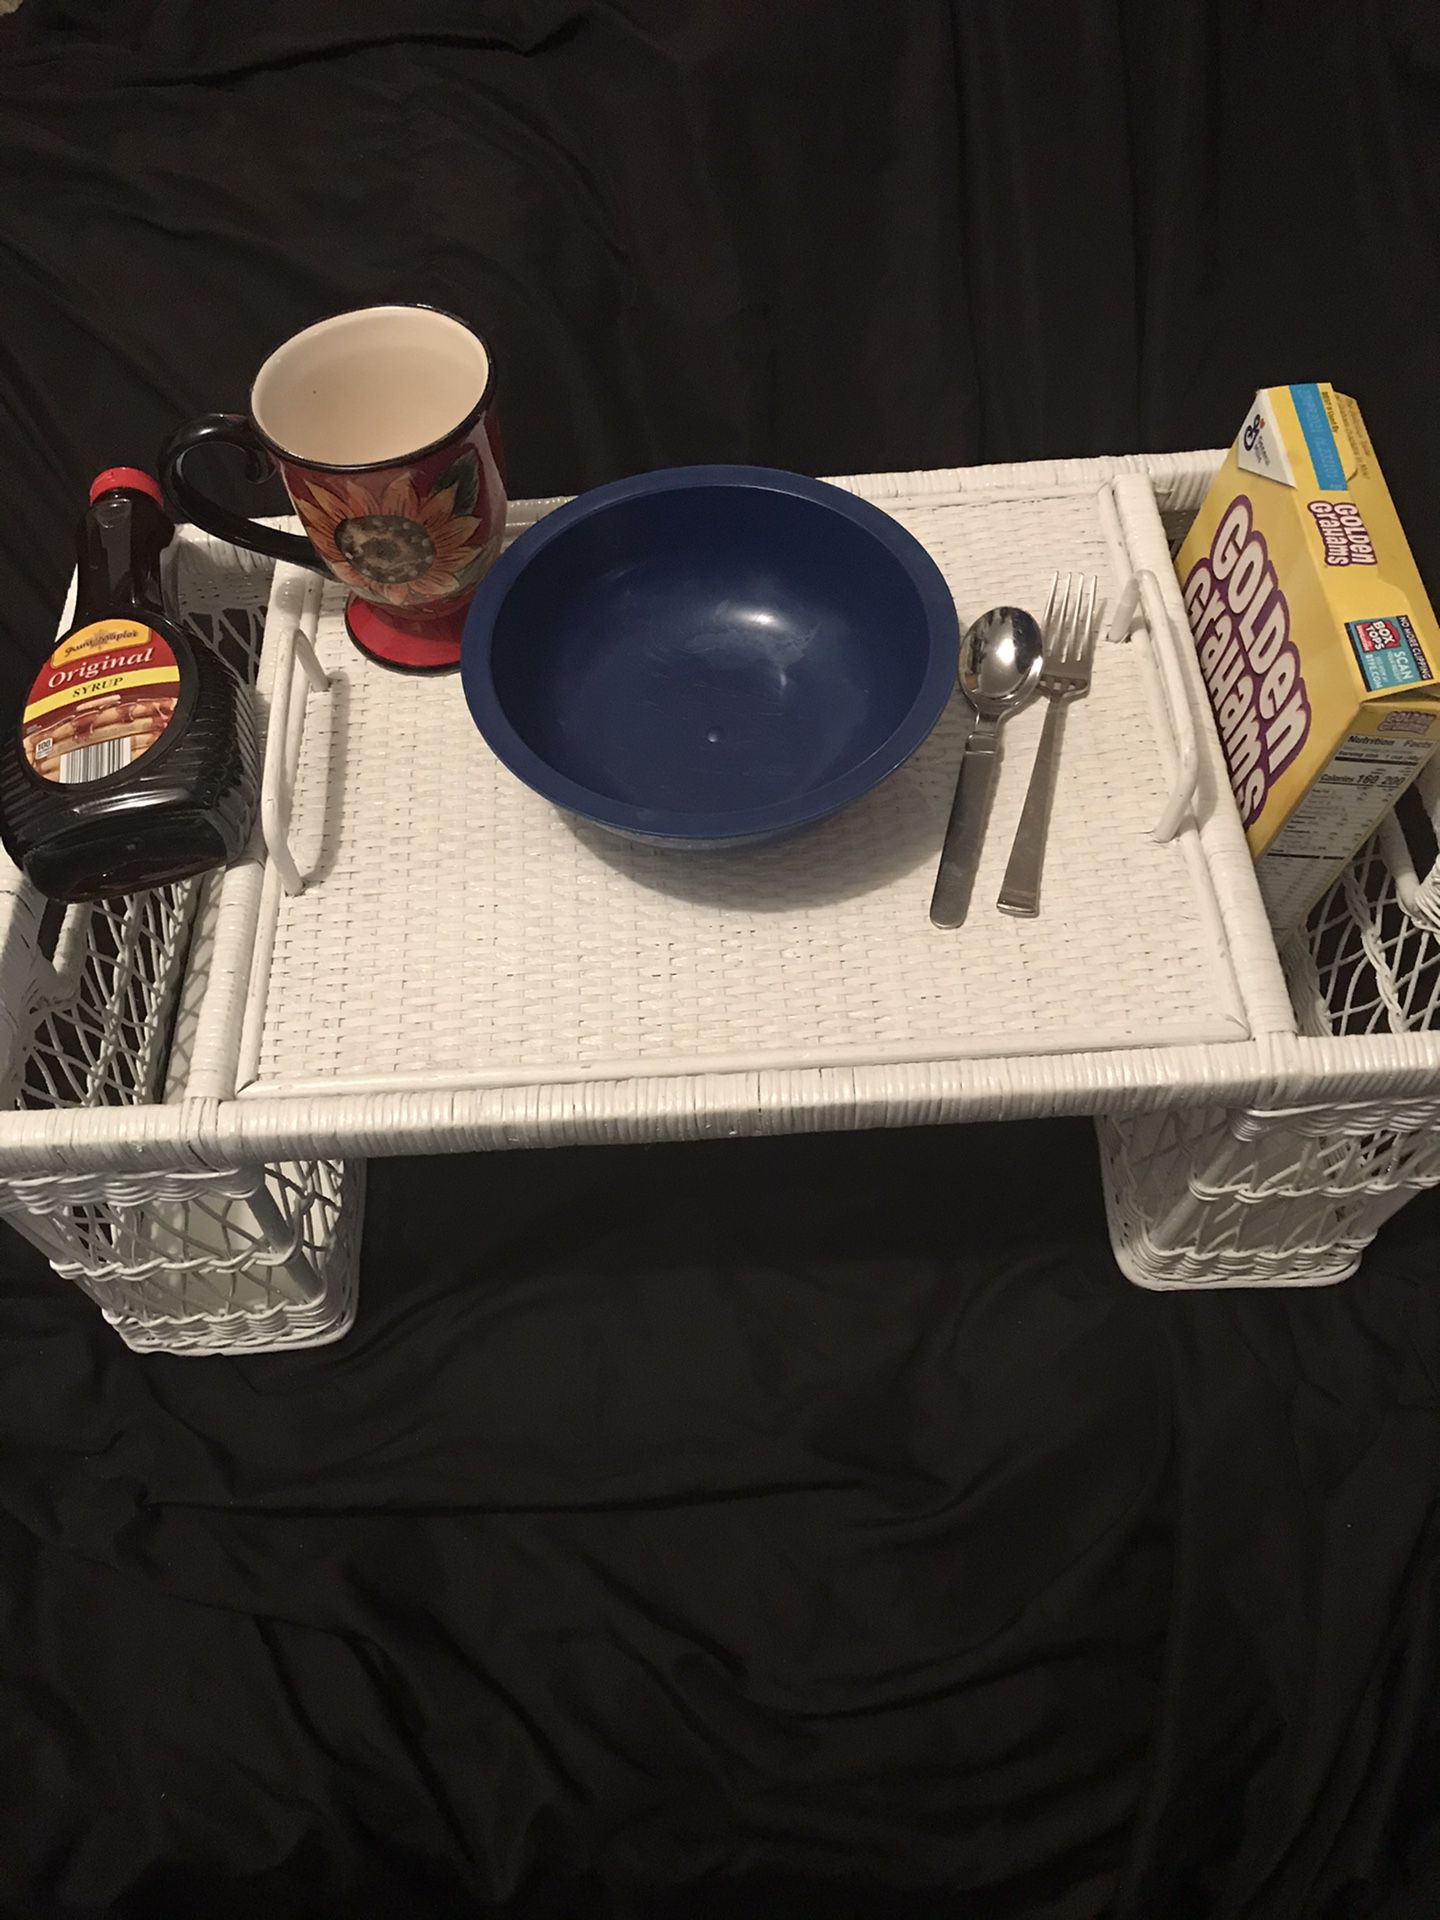 White painted wicker Bed tray big to hold cereal bowl cup utensils